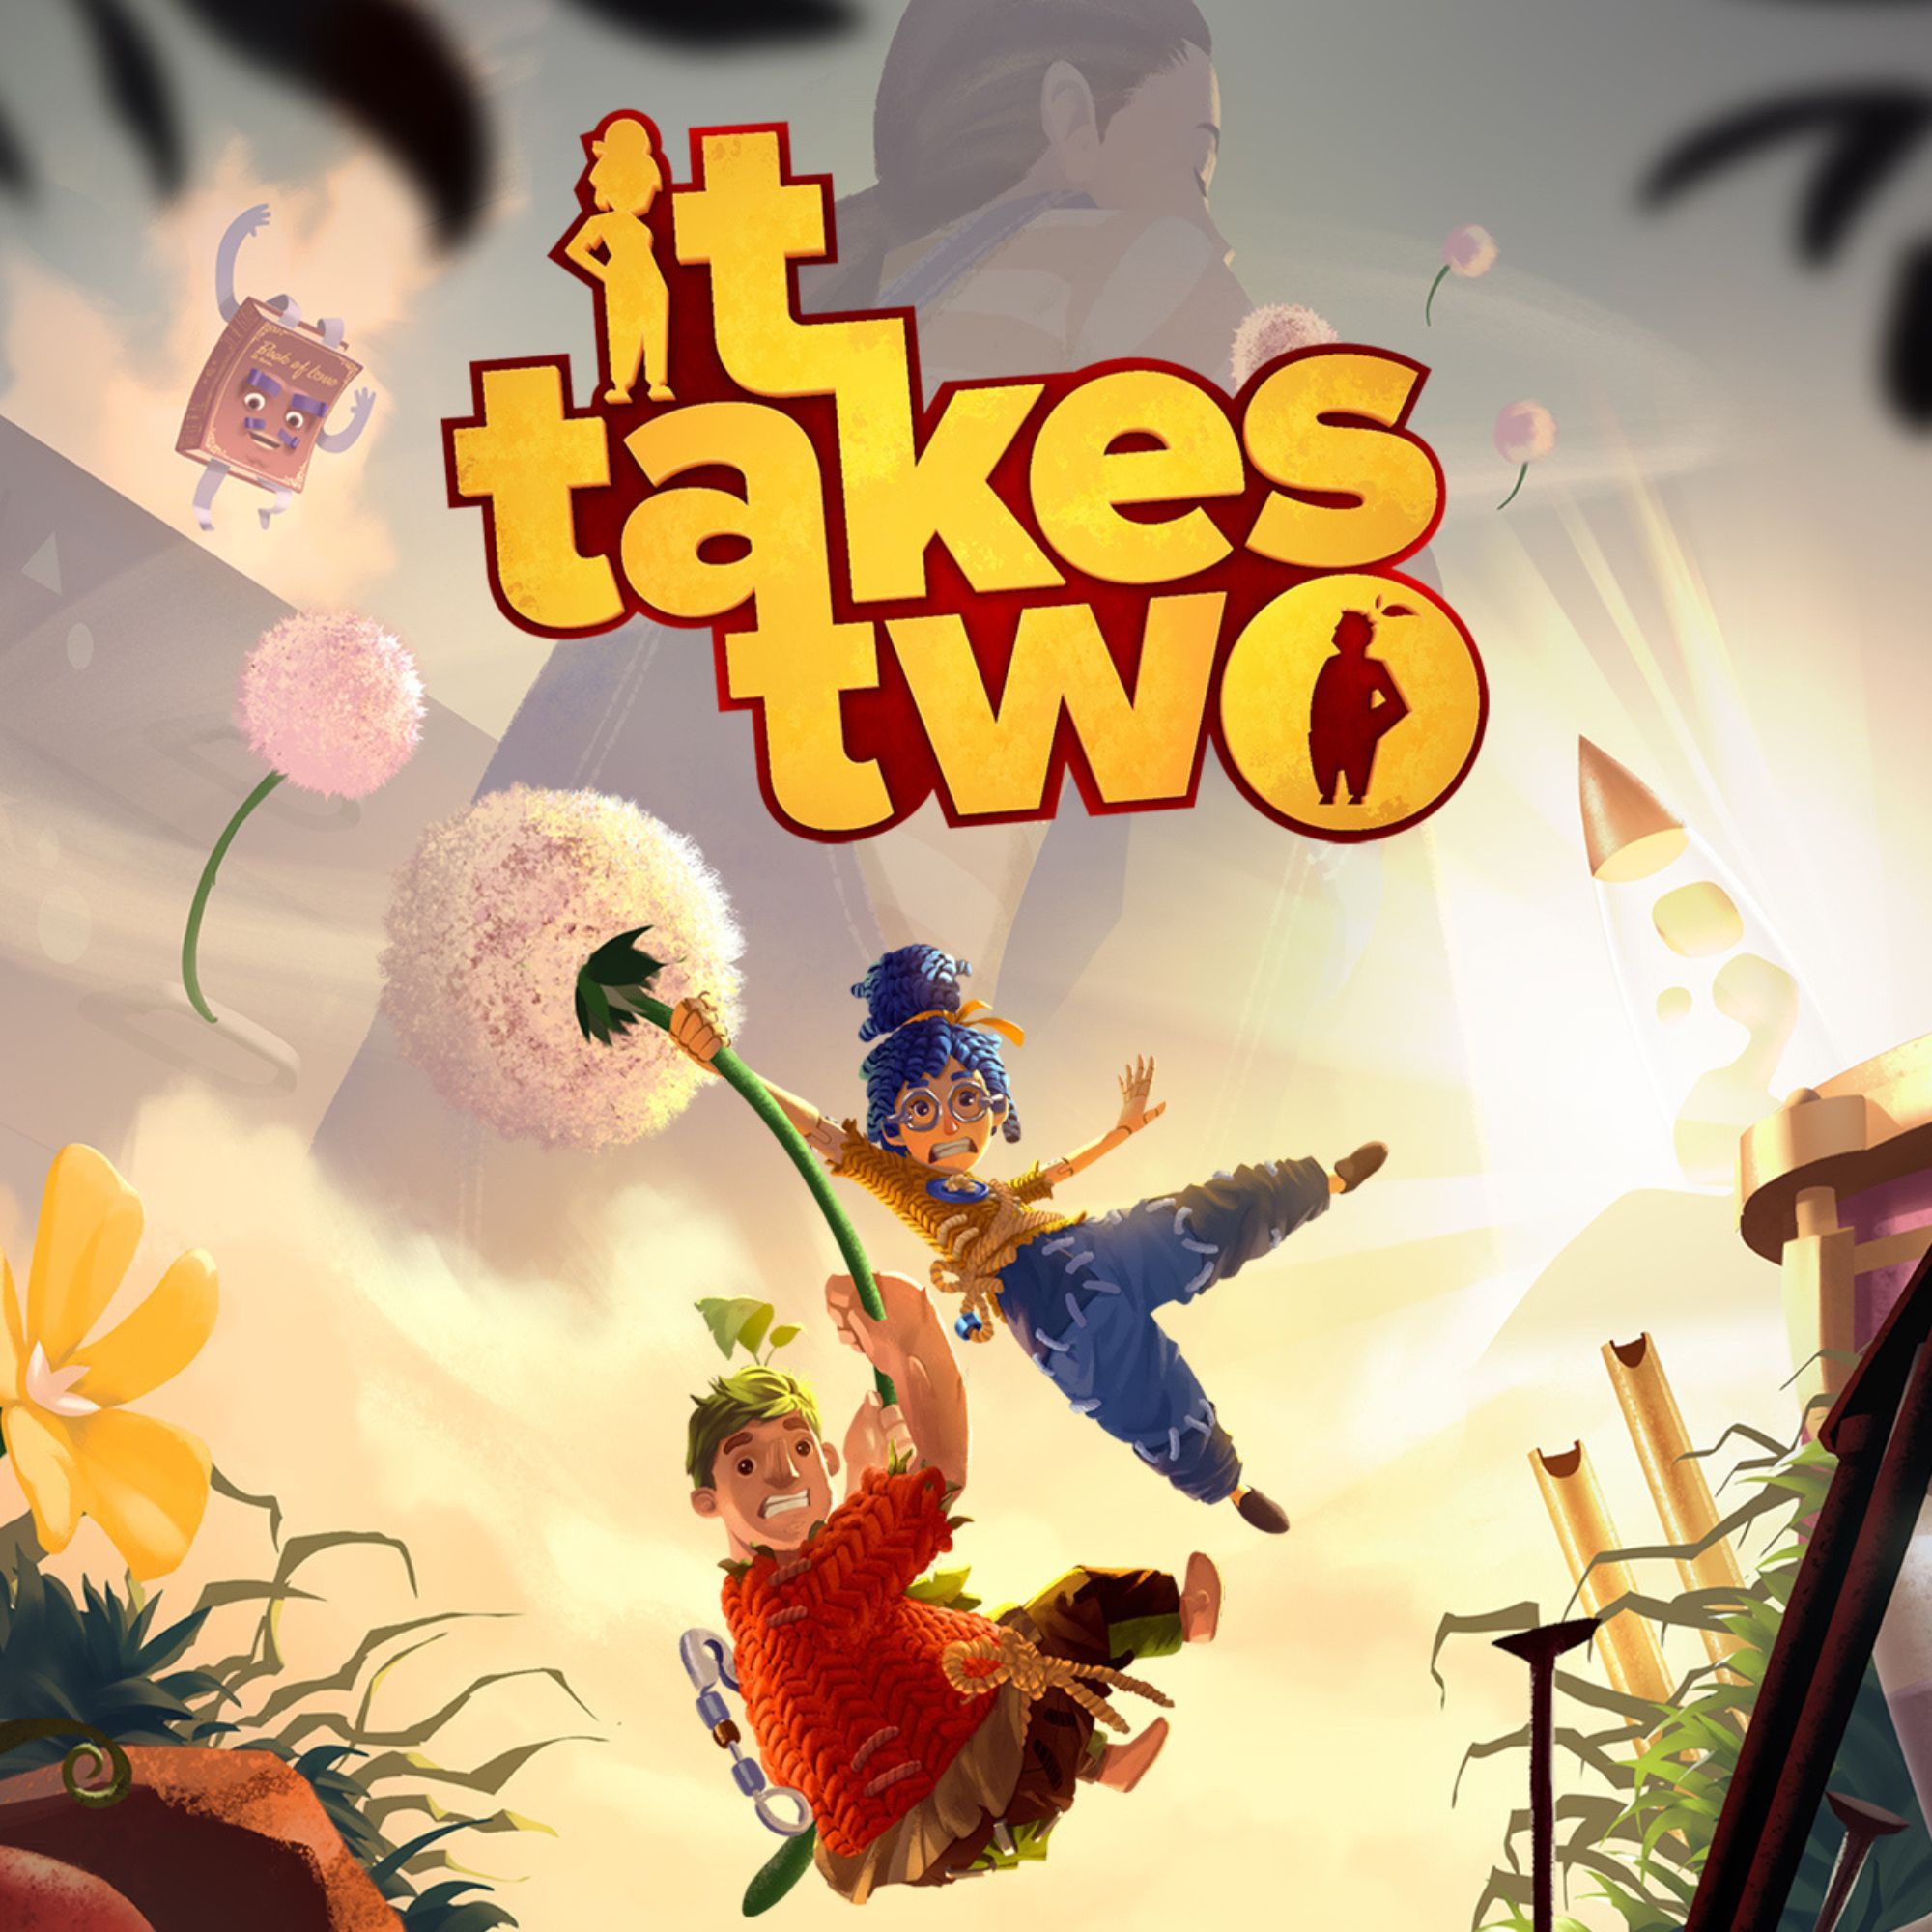 2000x2000 tag image for It Takes Two. A blue-haired character and a character with a red shirt hold on to a dandelion under the game's logo.